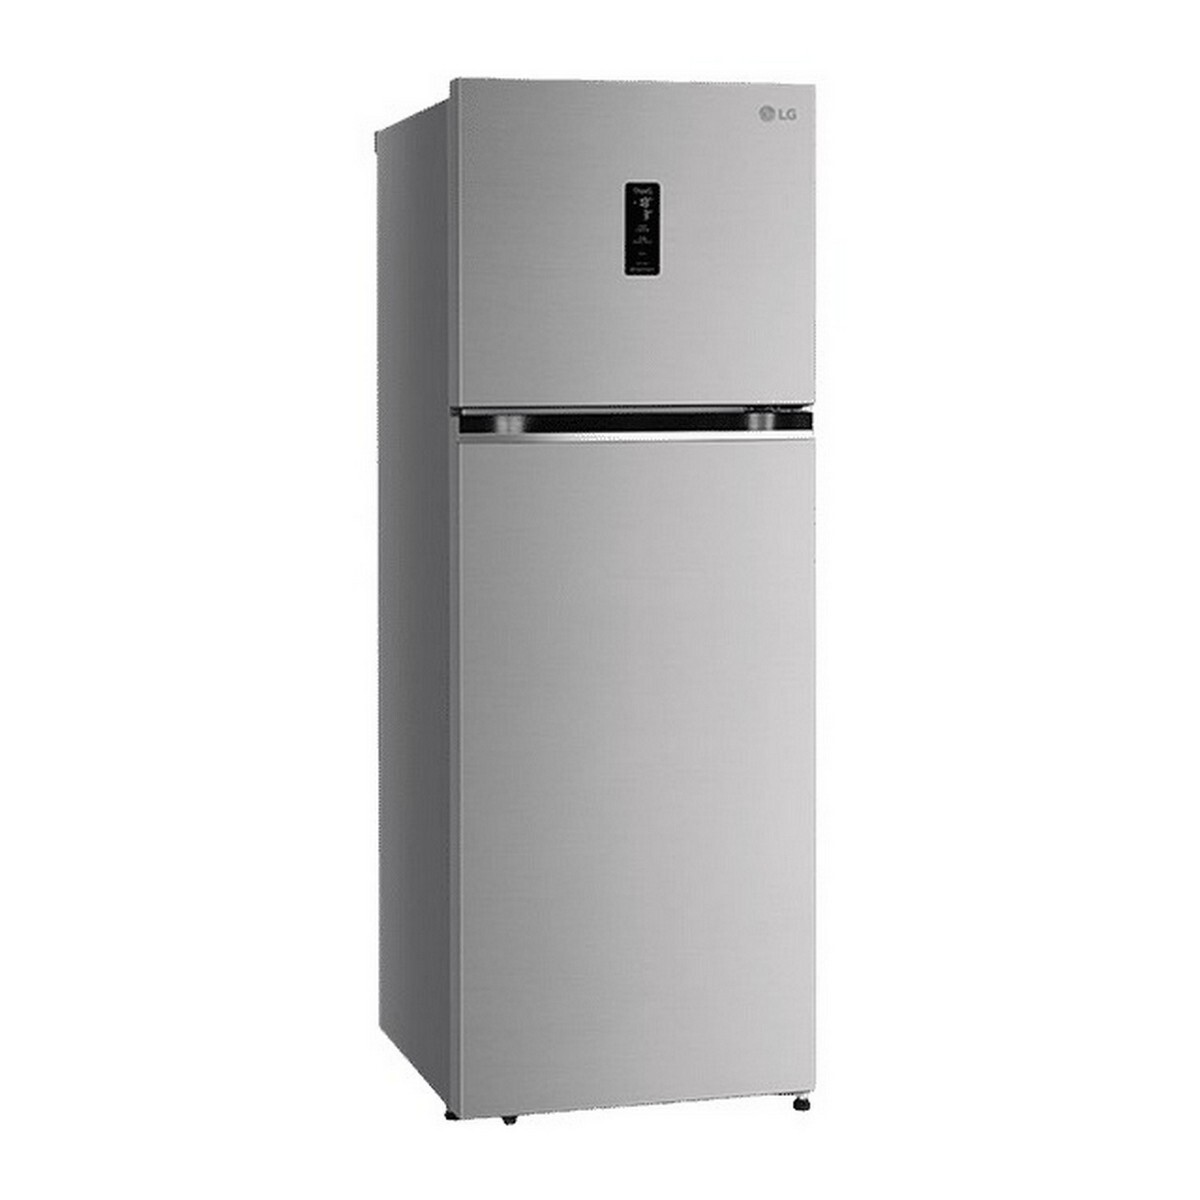 LG Frost Free Double Door Refrigerator GL-T342TPZY 322L Shiny Steel